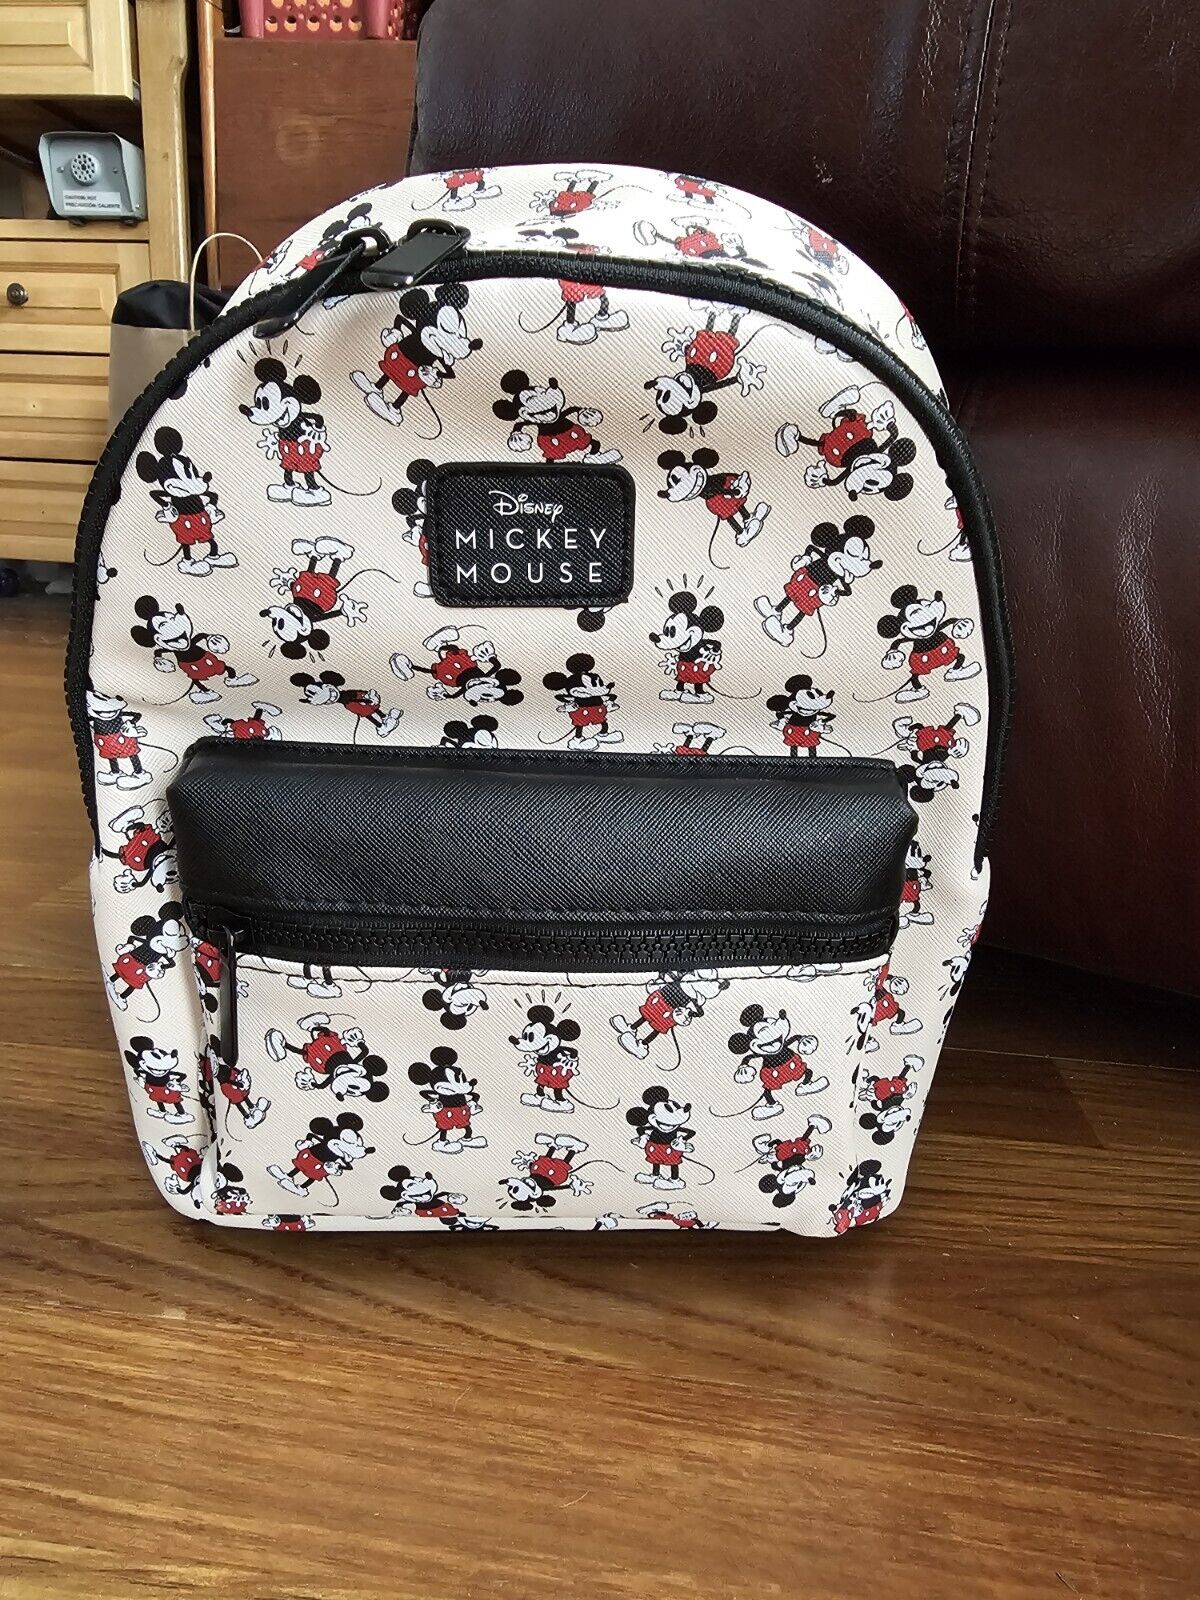 Bioworld Mickey Mouse mini-backpack NEW WITH TAGS